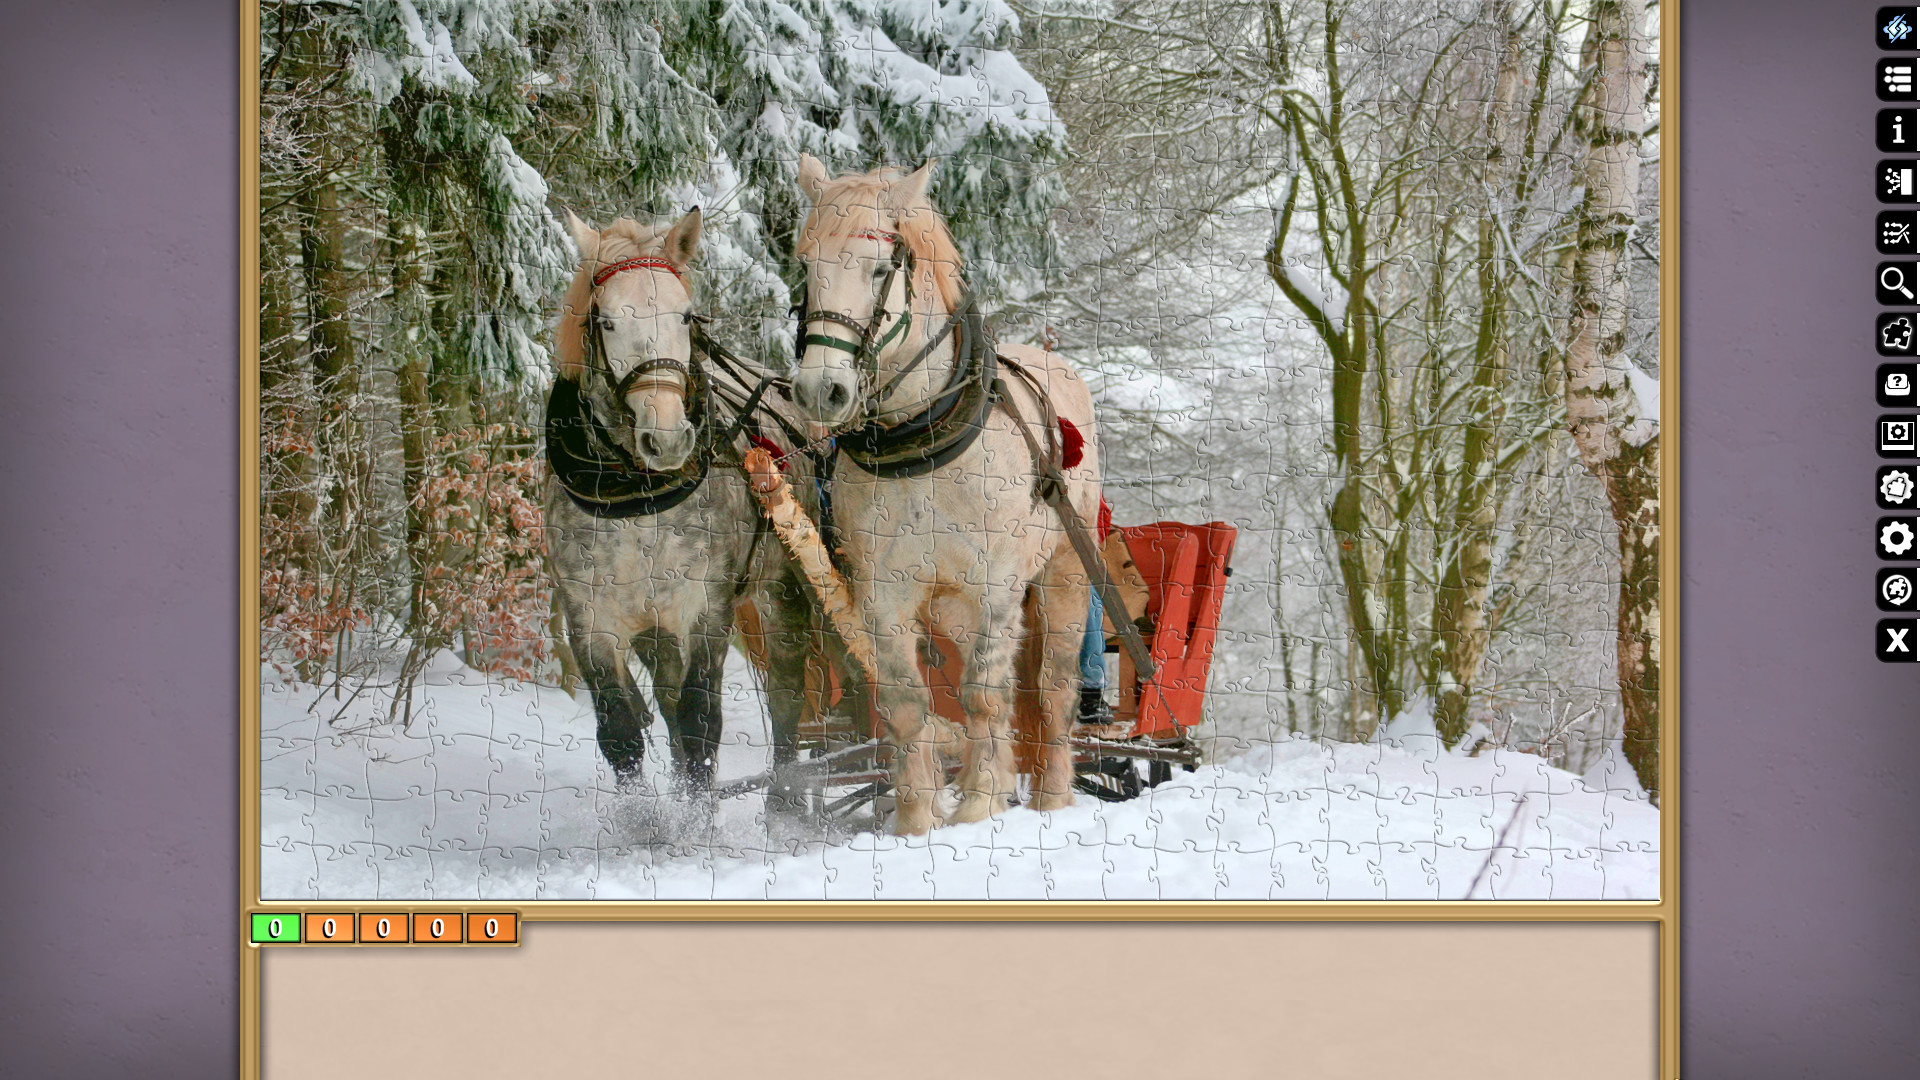 Jigsaw Puzzle Pack - Pixel Puzzles Ultimate: Winter screenshot